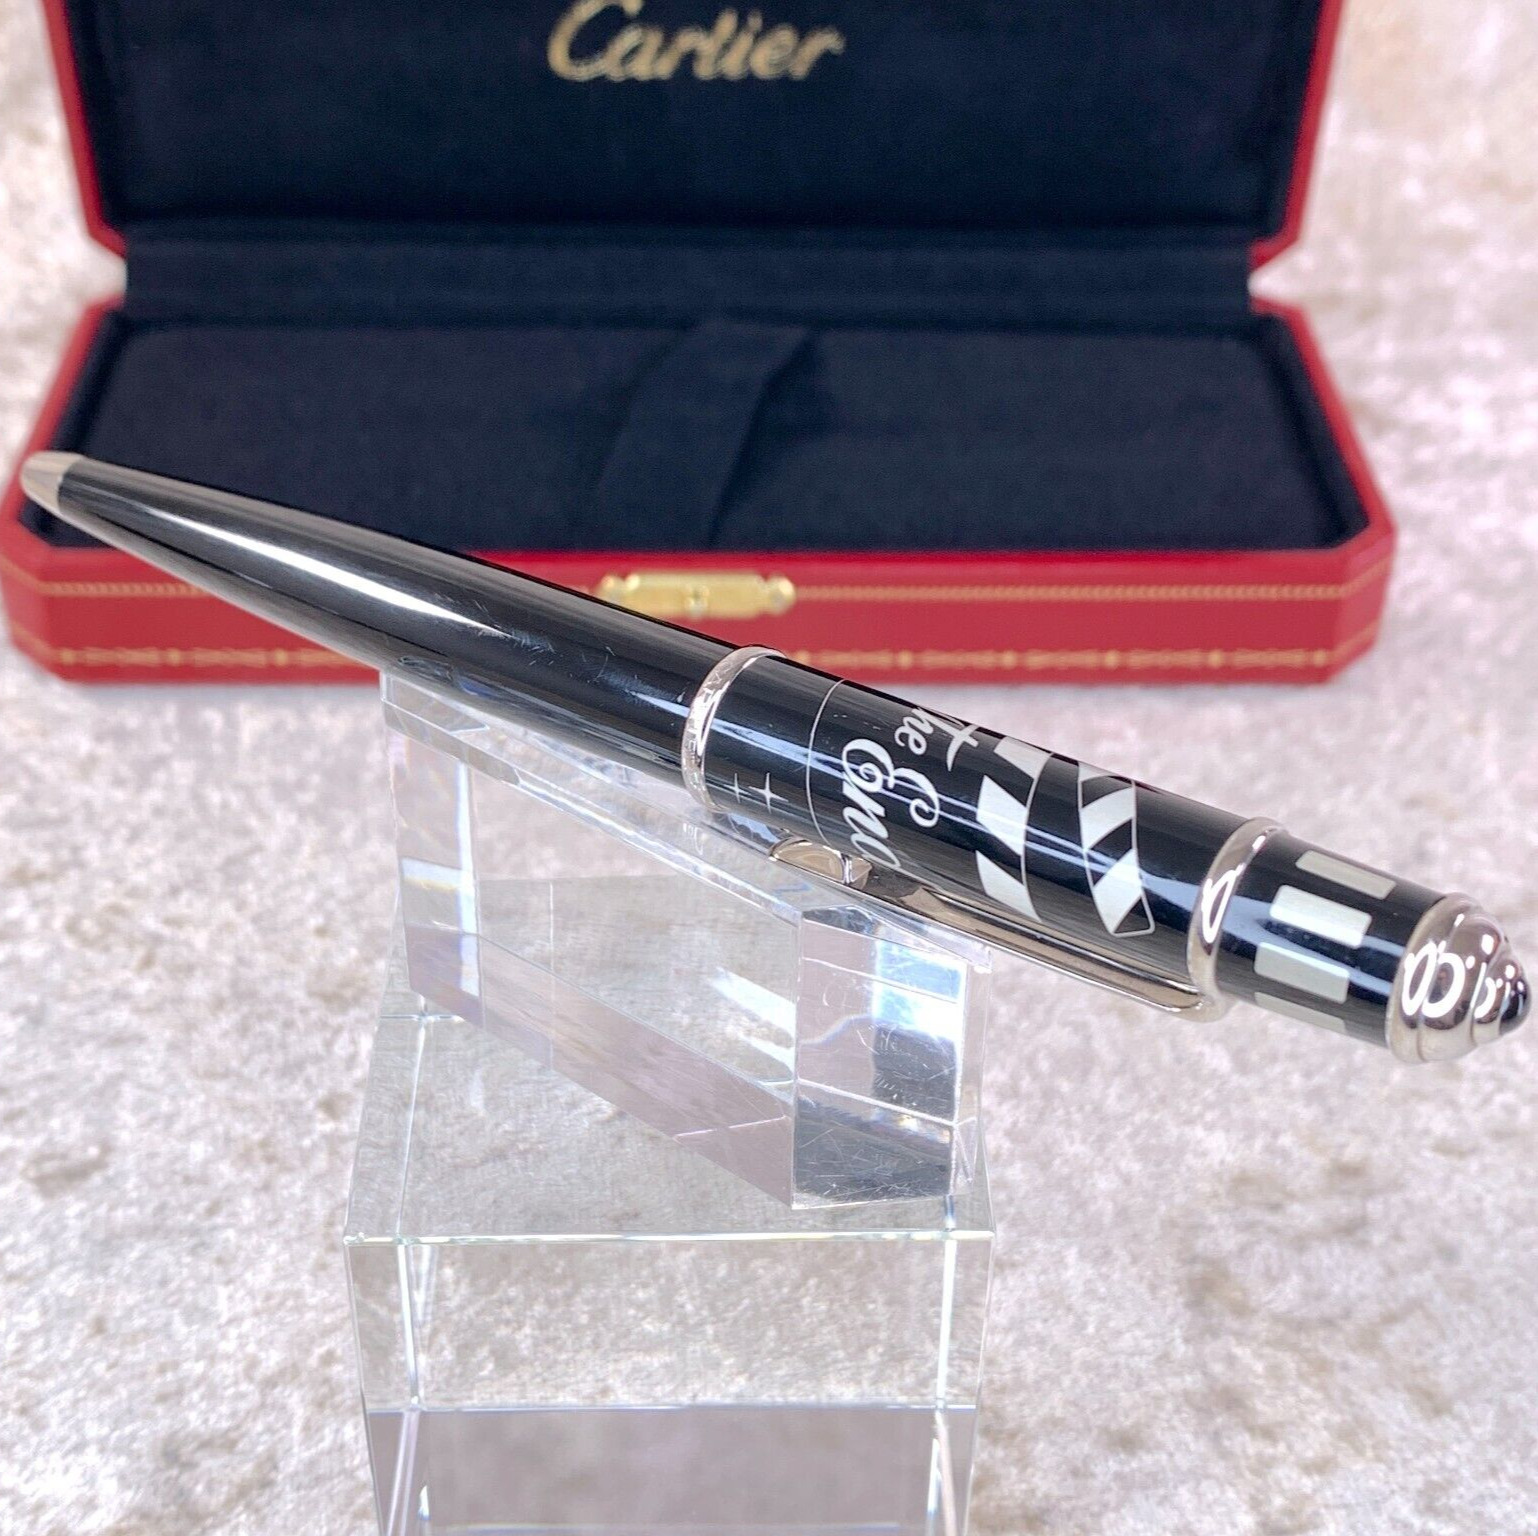 Authentic Cartier Ballpoint Pen Limited Edition Diabolo Cinema The End with Case